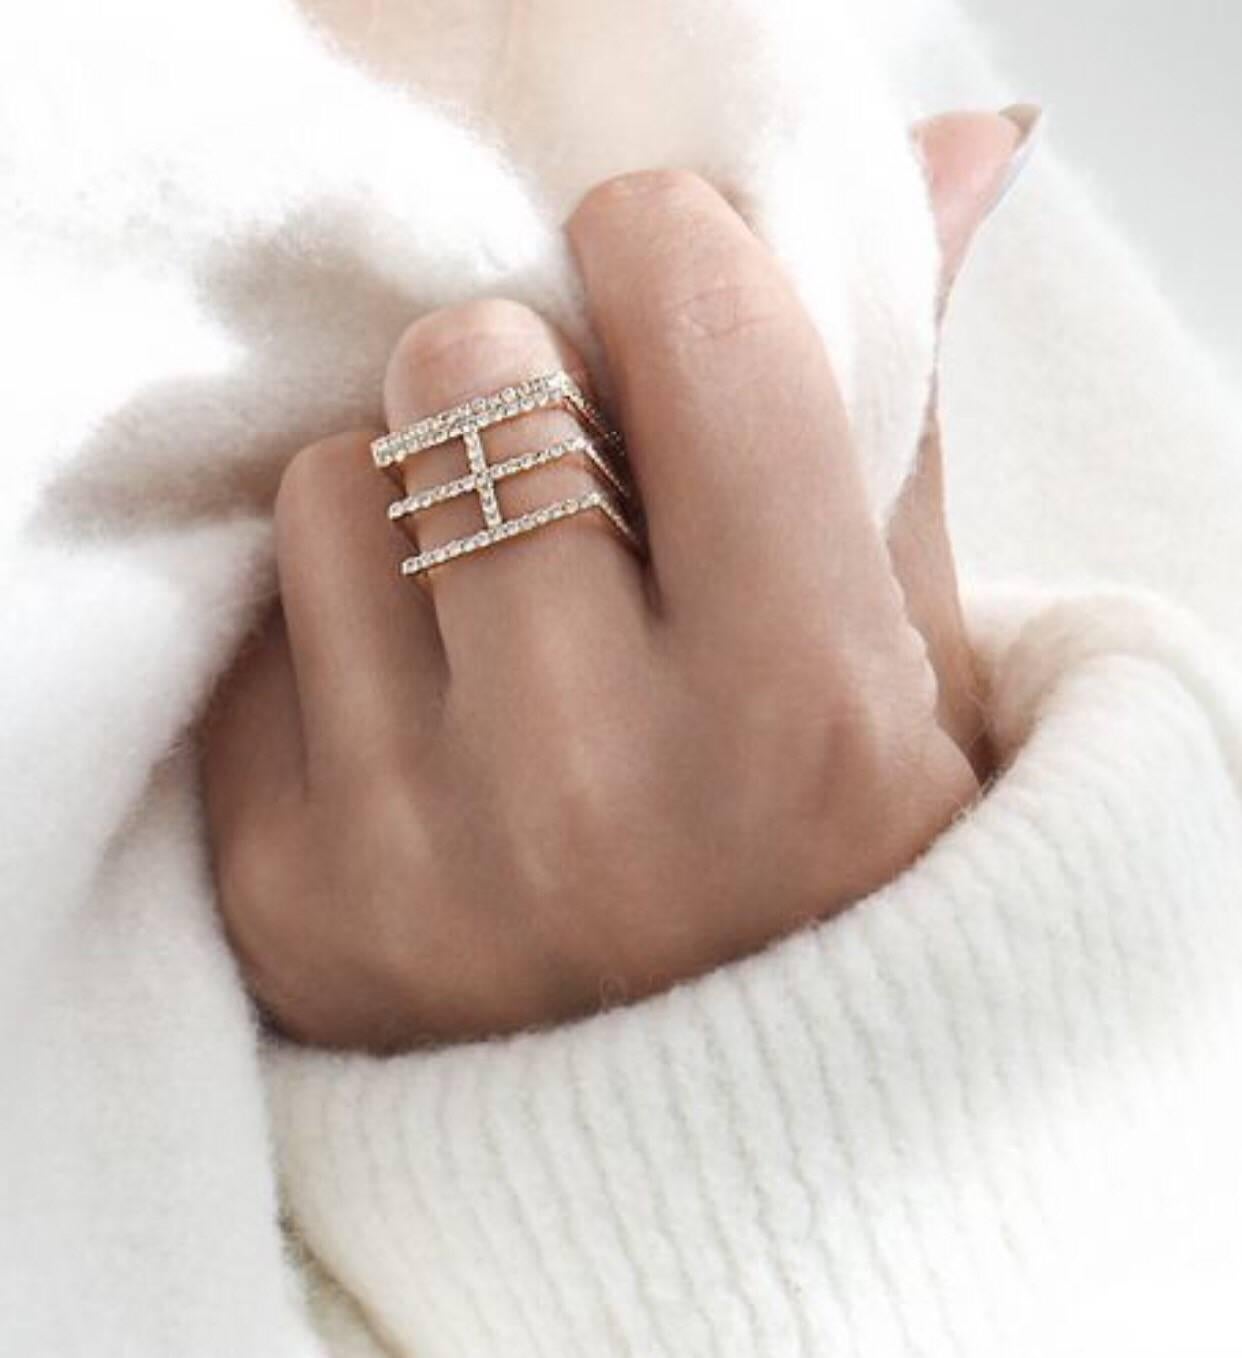 Sophie Birgitt 18 Karat Yellow Gold Geometric Square Cocktail Ring 

*MADE TO ORDER: 3 WEEKS LEAD TIME*
*WORLDWIDE COMPLIMENTARY SHIPPING*

The Angles collection boast a range of geometric, angular pieces with clean lines. The geometric character